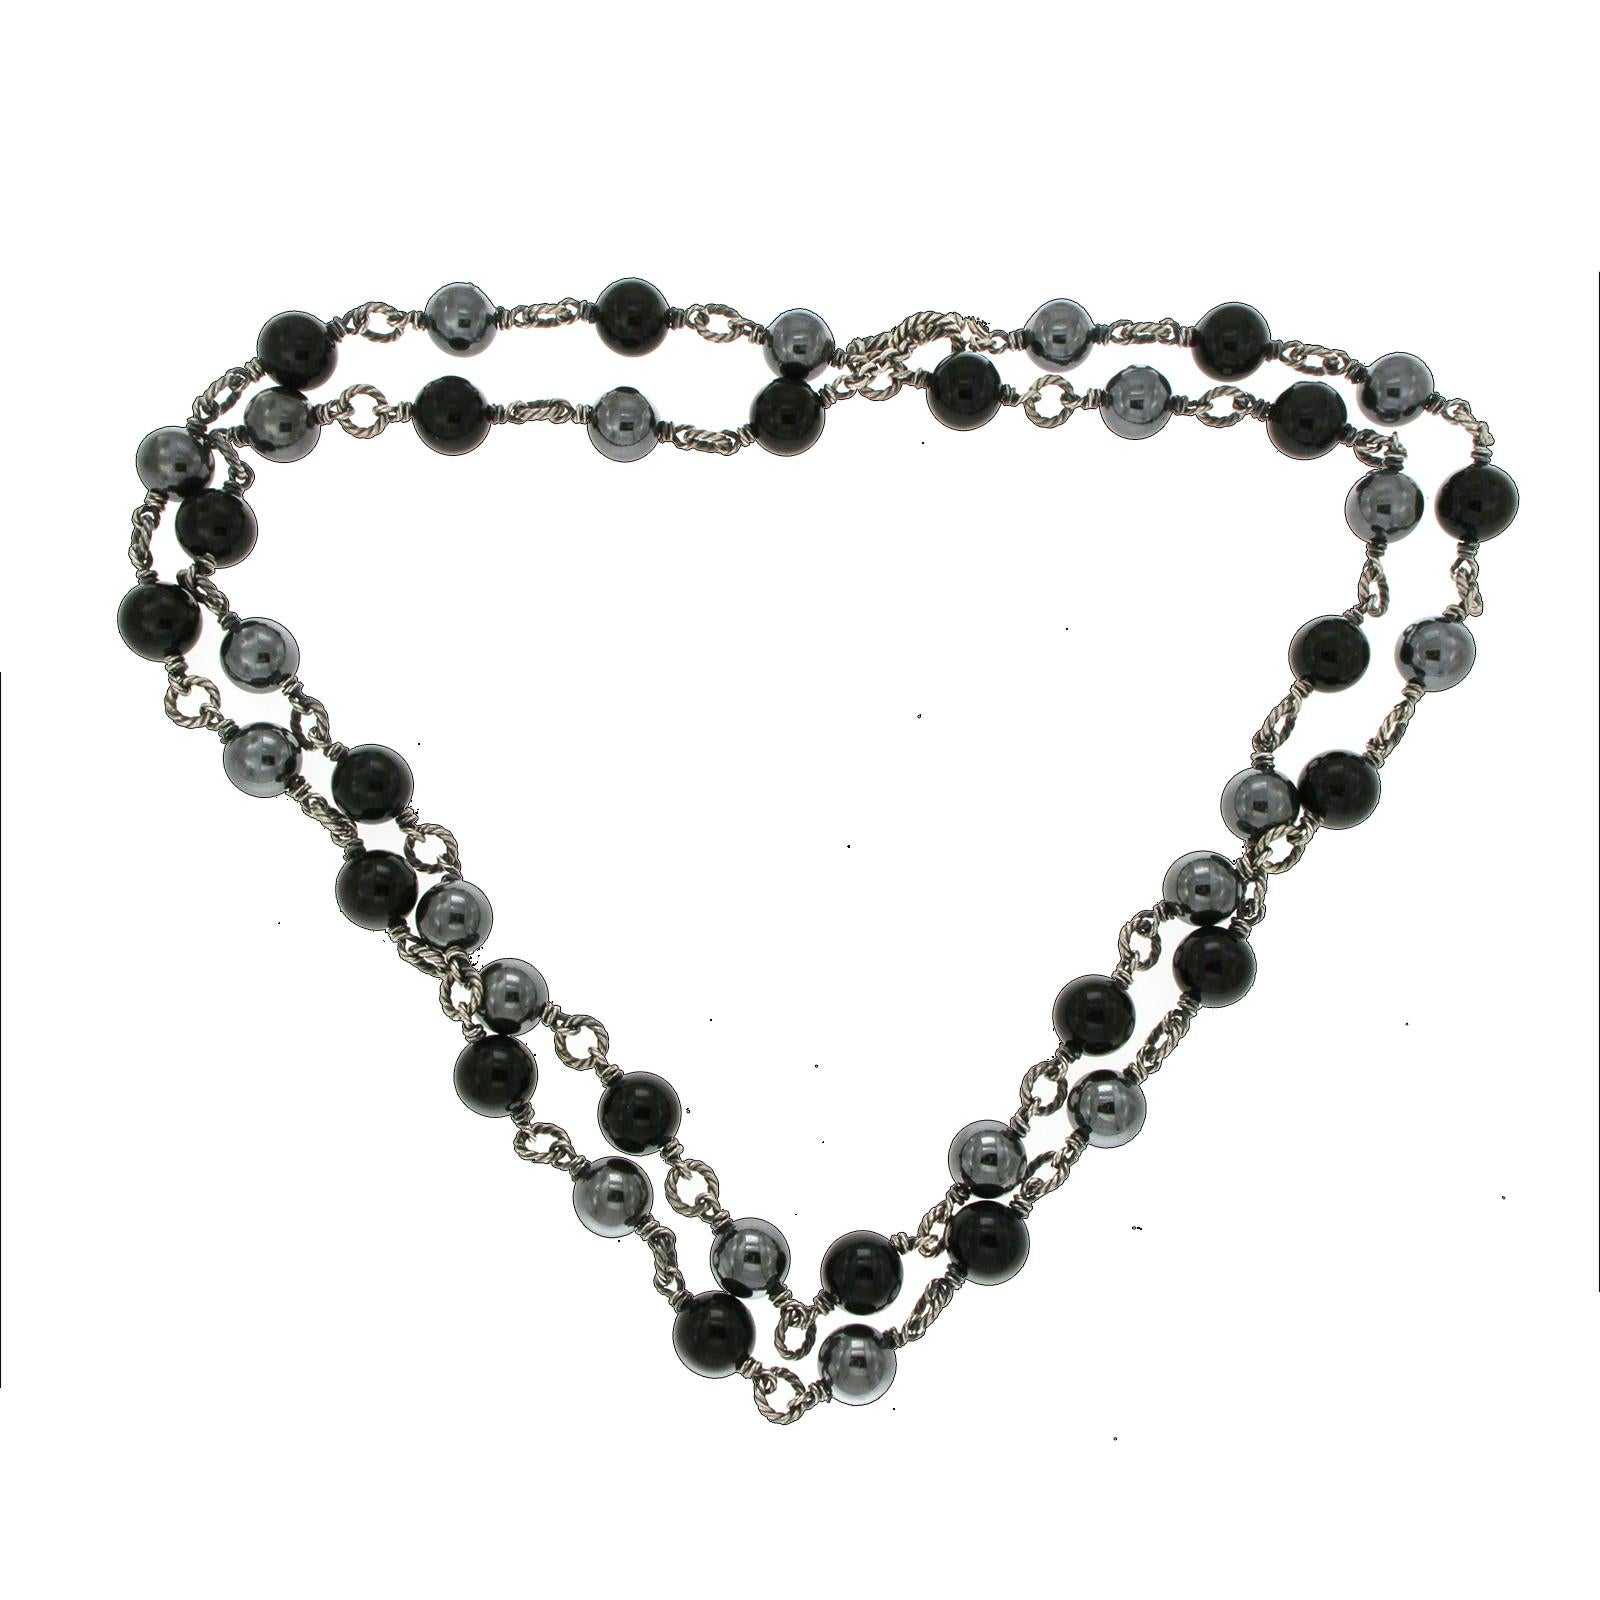 Type: Necklace
Wearable Length: 39